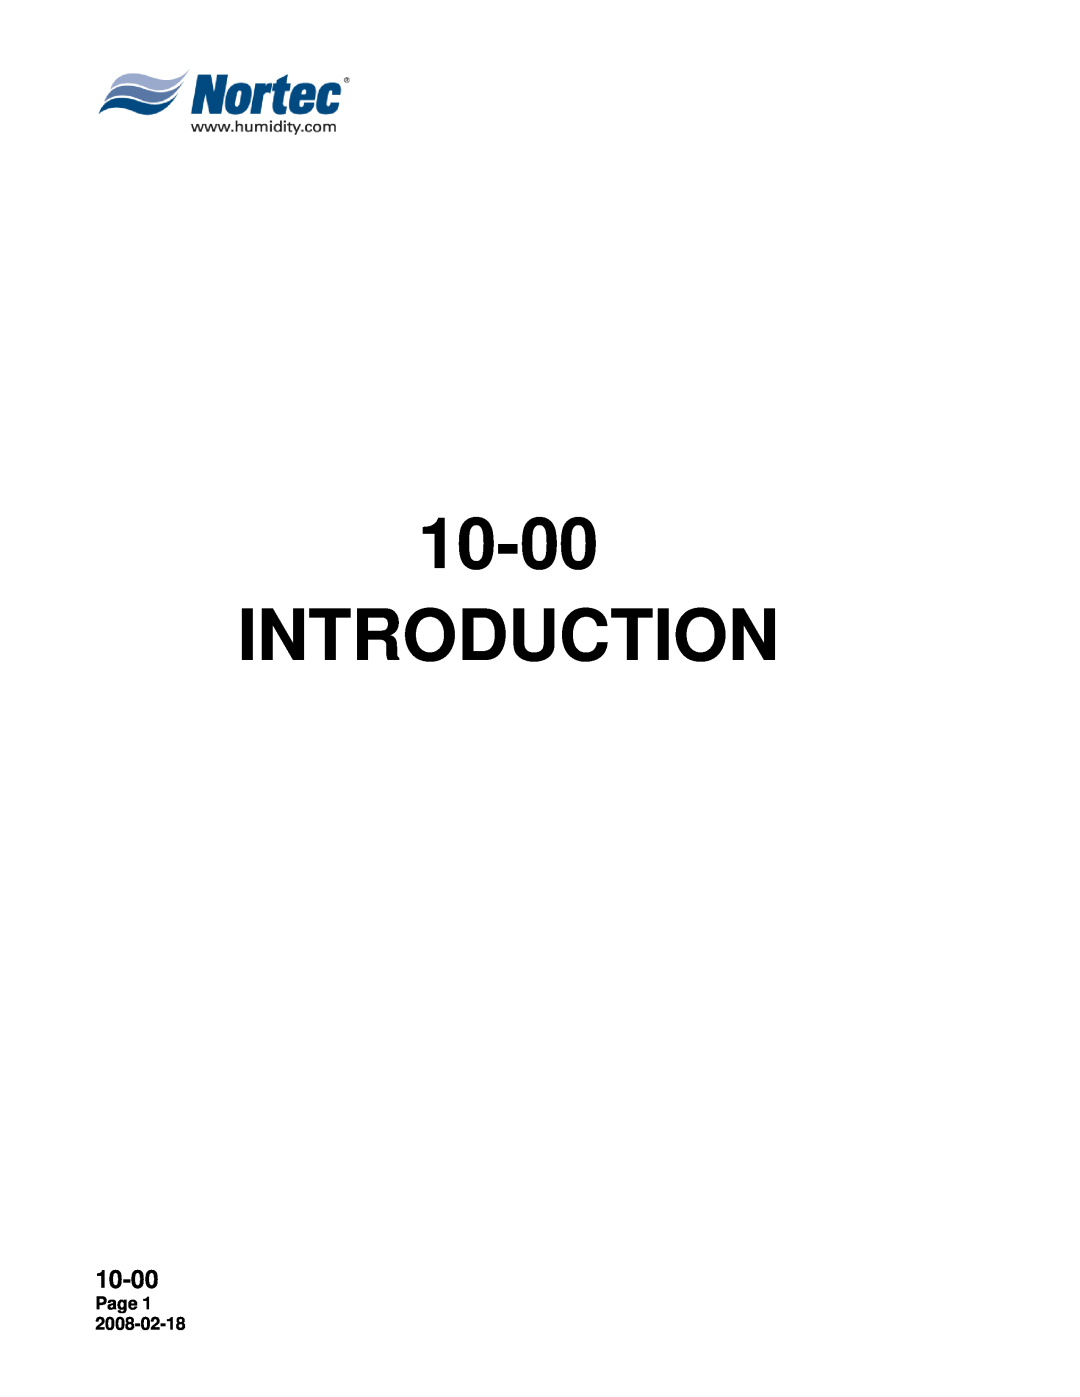 Nortec Industries NHRS Series manual Introduction, 10-00, Page 